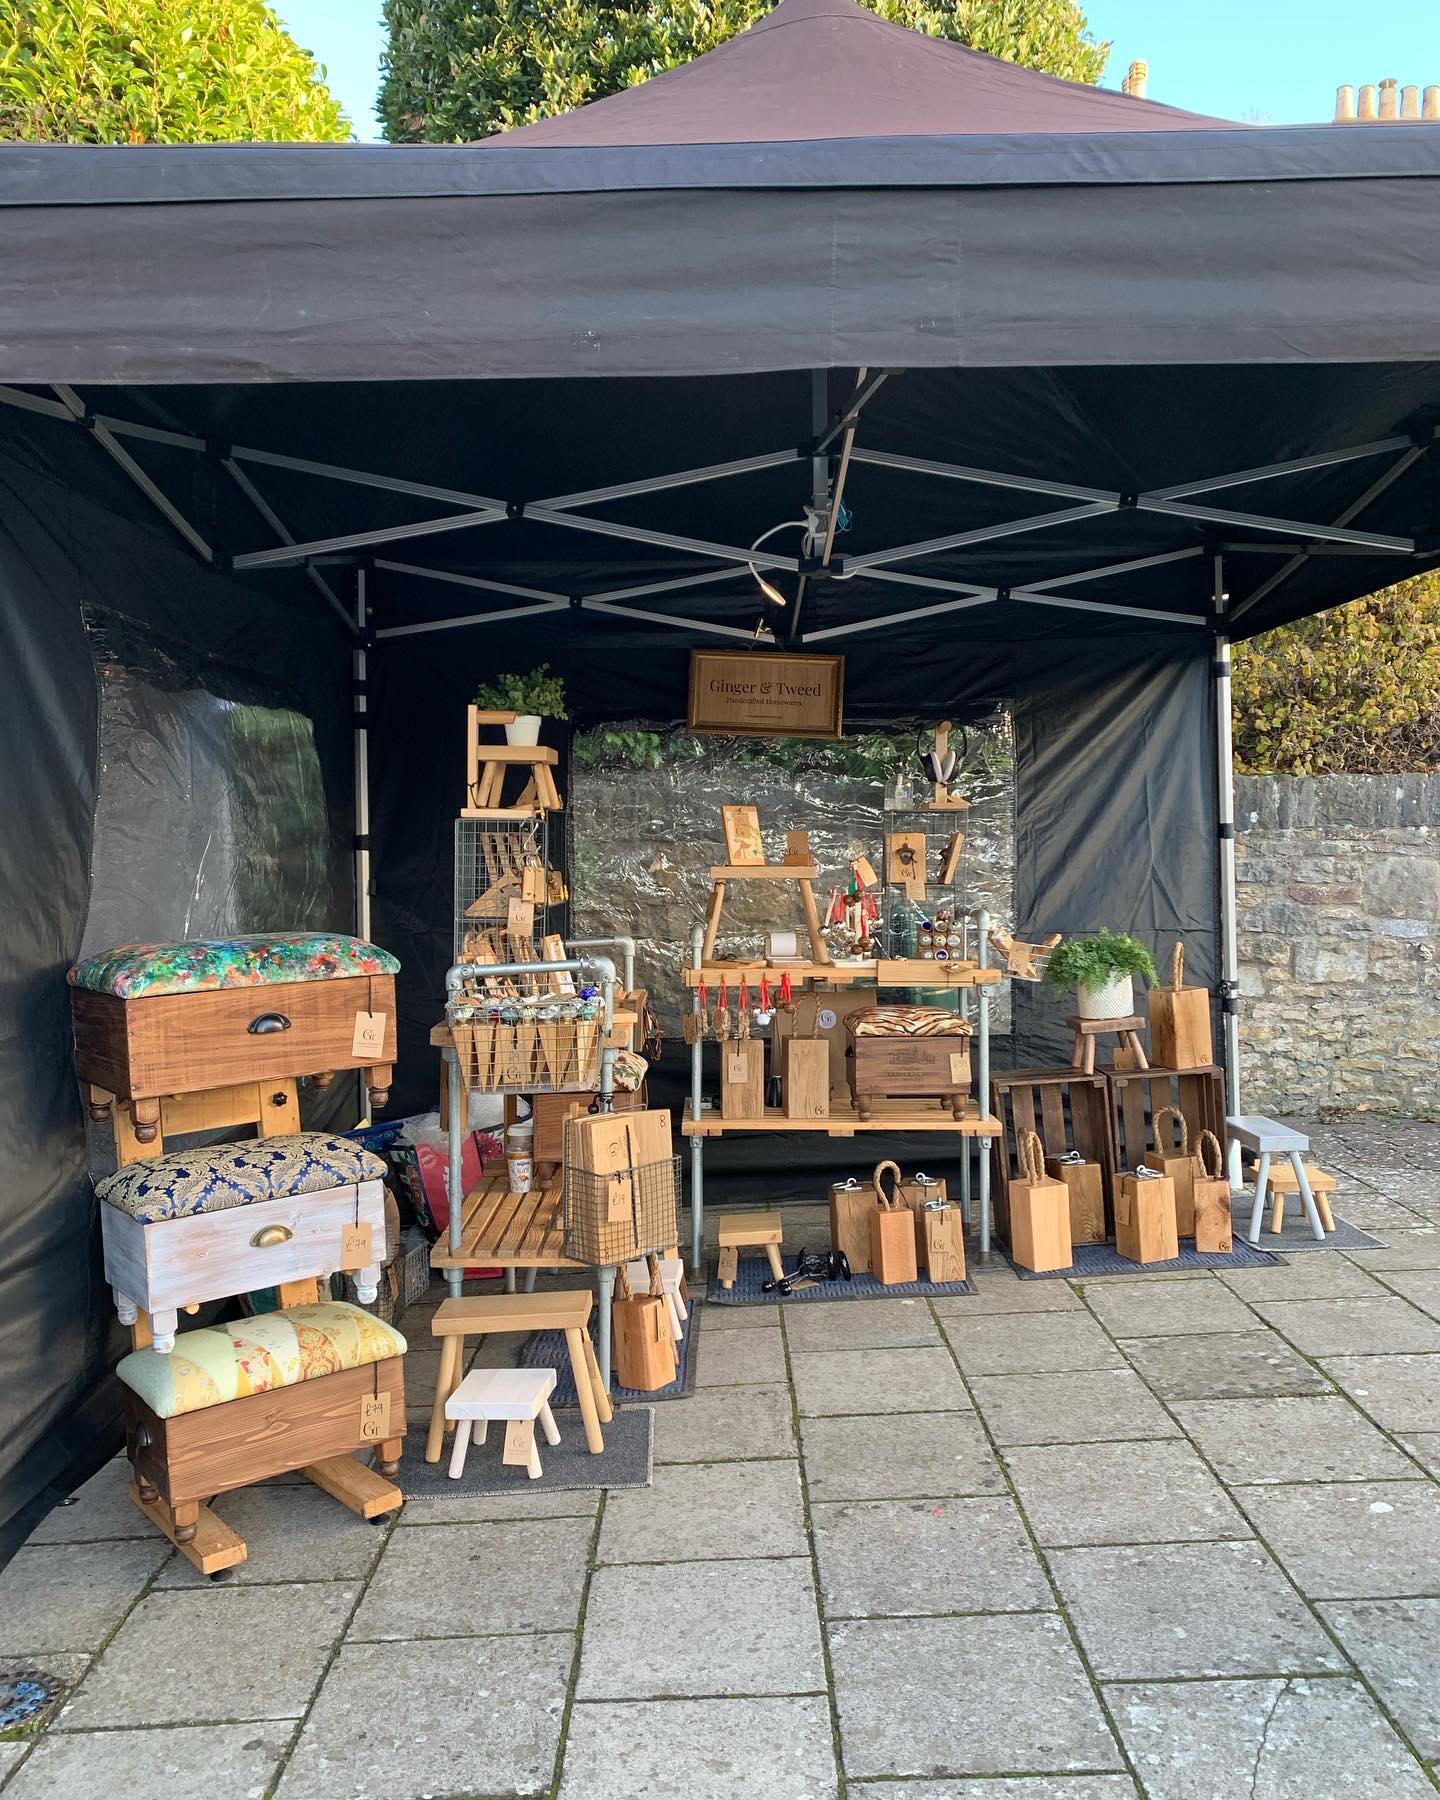 Just over an hour to go! Find us at the top of Hill Road in Clevedon. There are lots of fabulous stalls, mulled wine and great food.